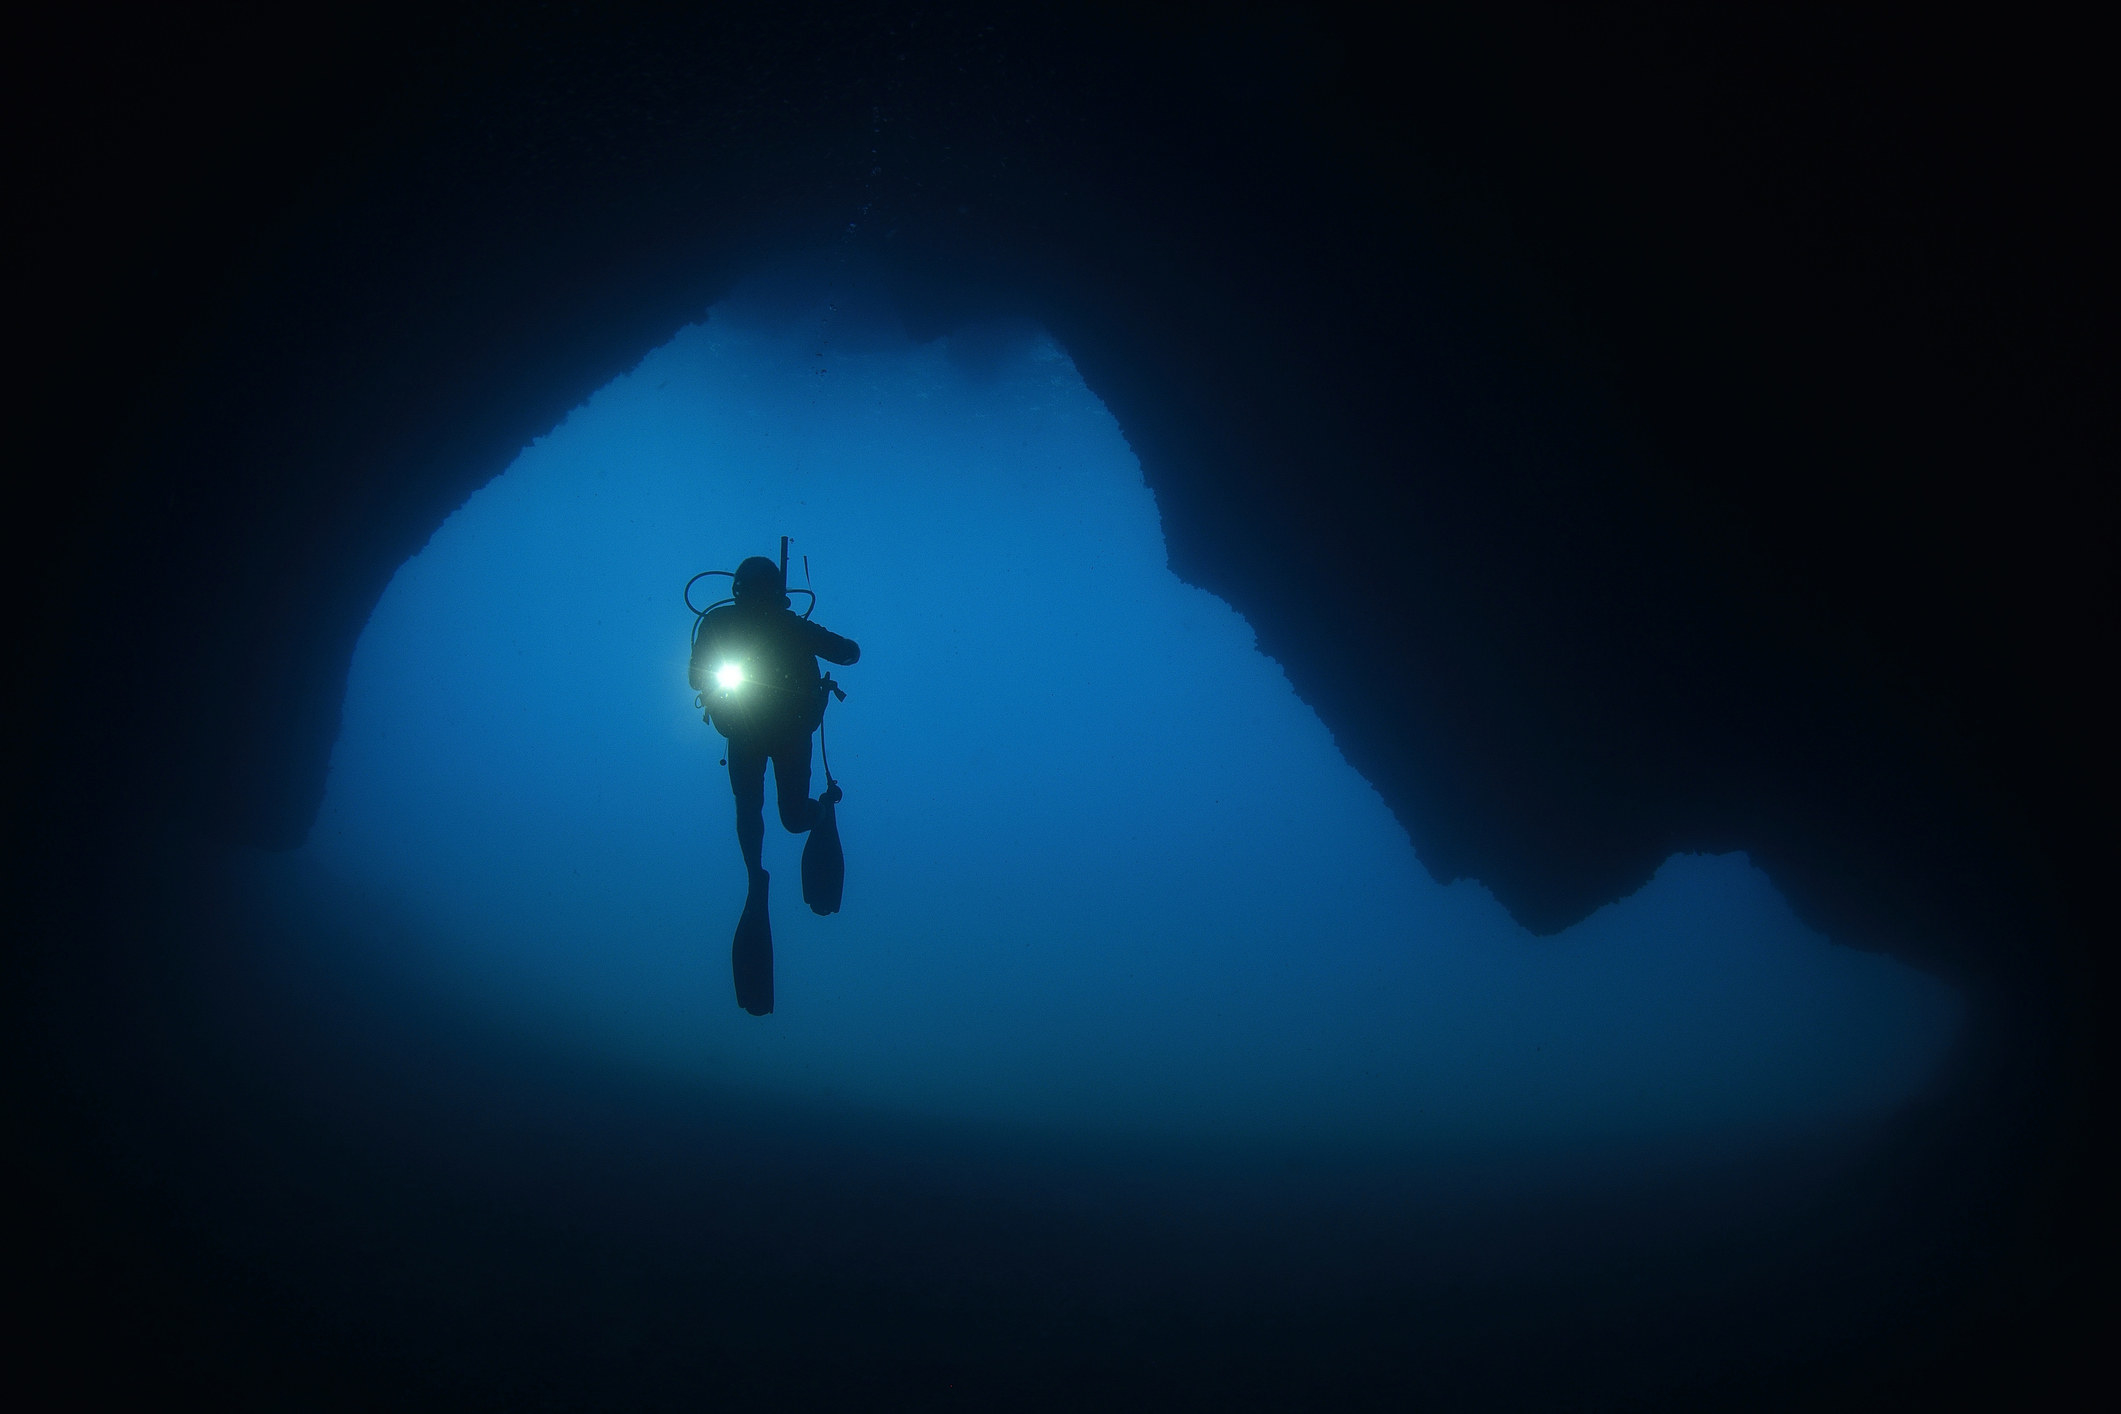 Someone cave diving in a dark underwater cave